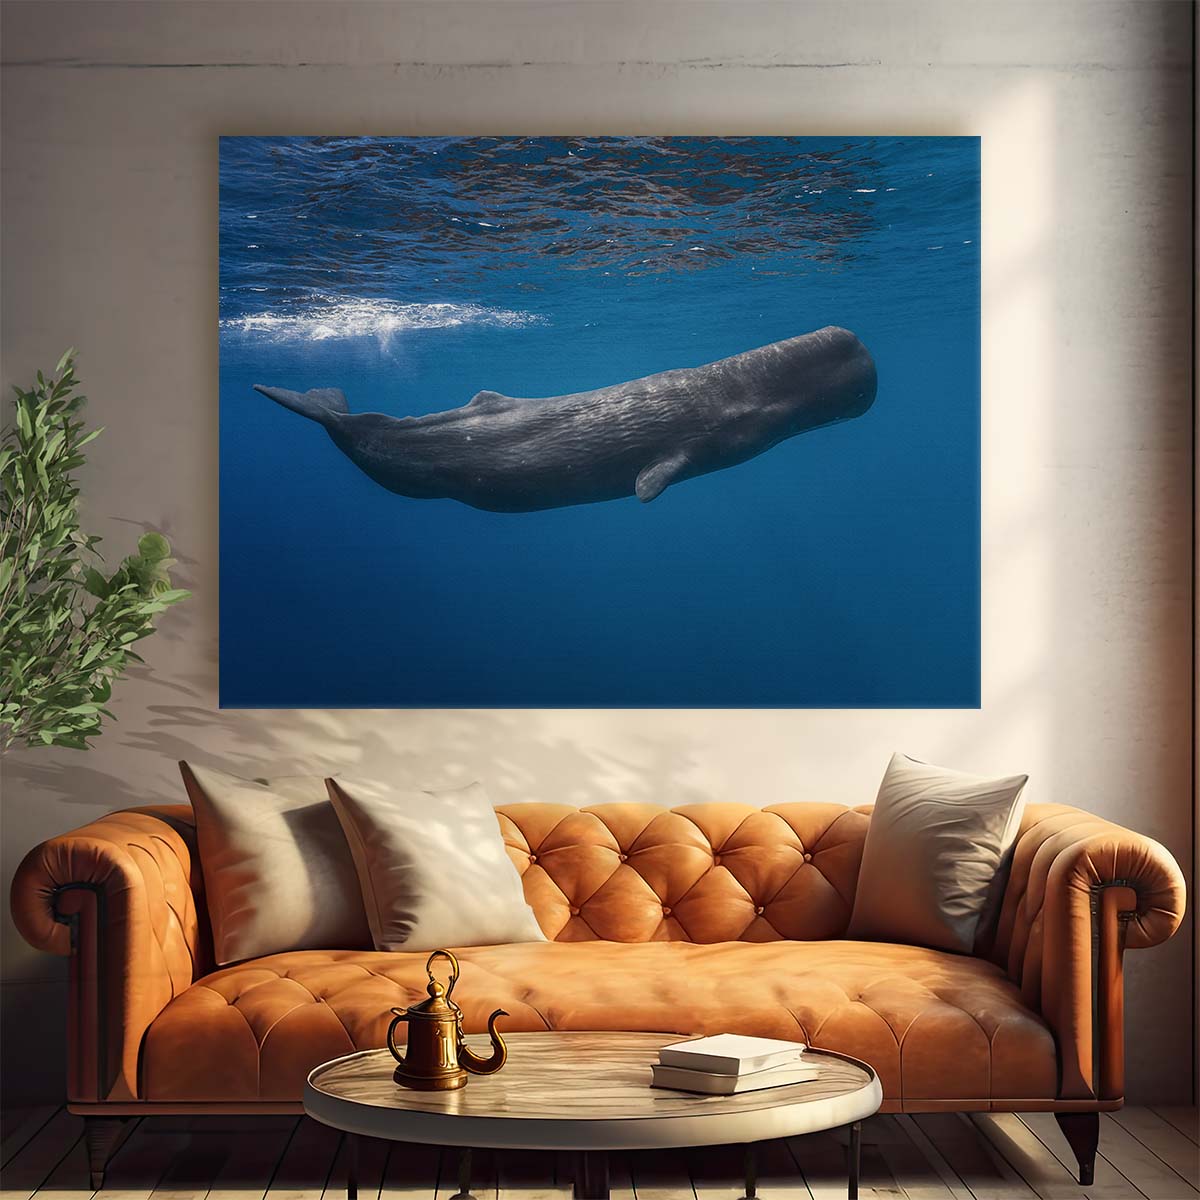 Majestic Sperm Whale Underwater Dive Wall Art by Luxuriance Designs. Made in USA.